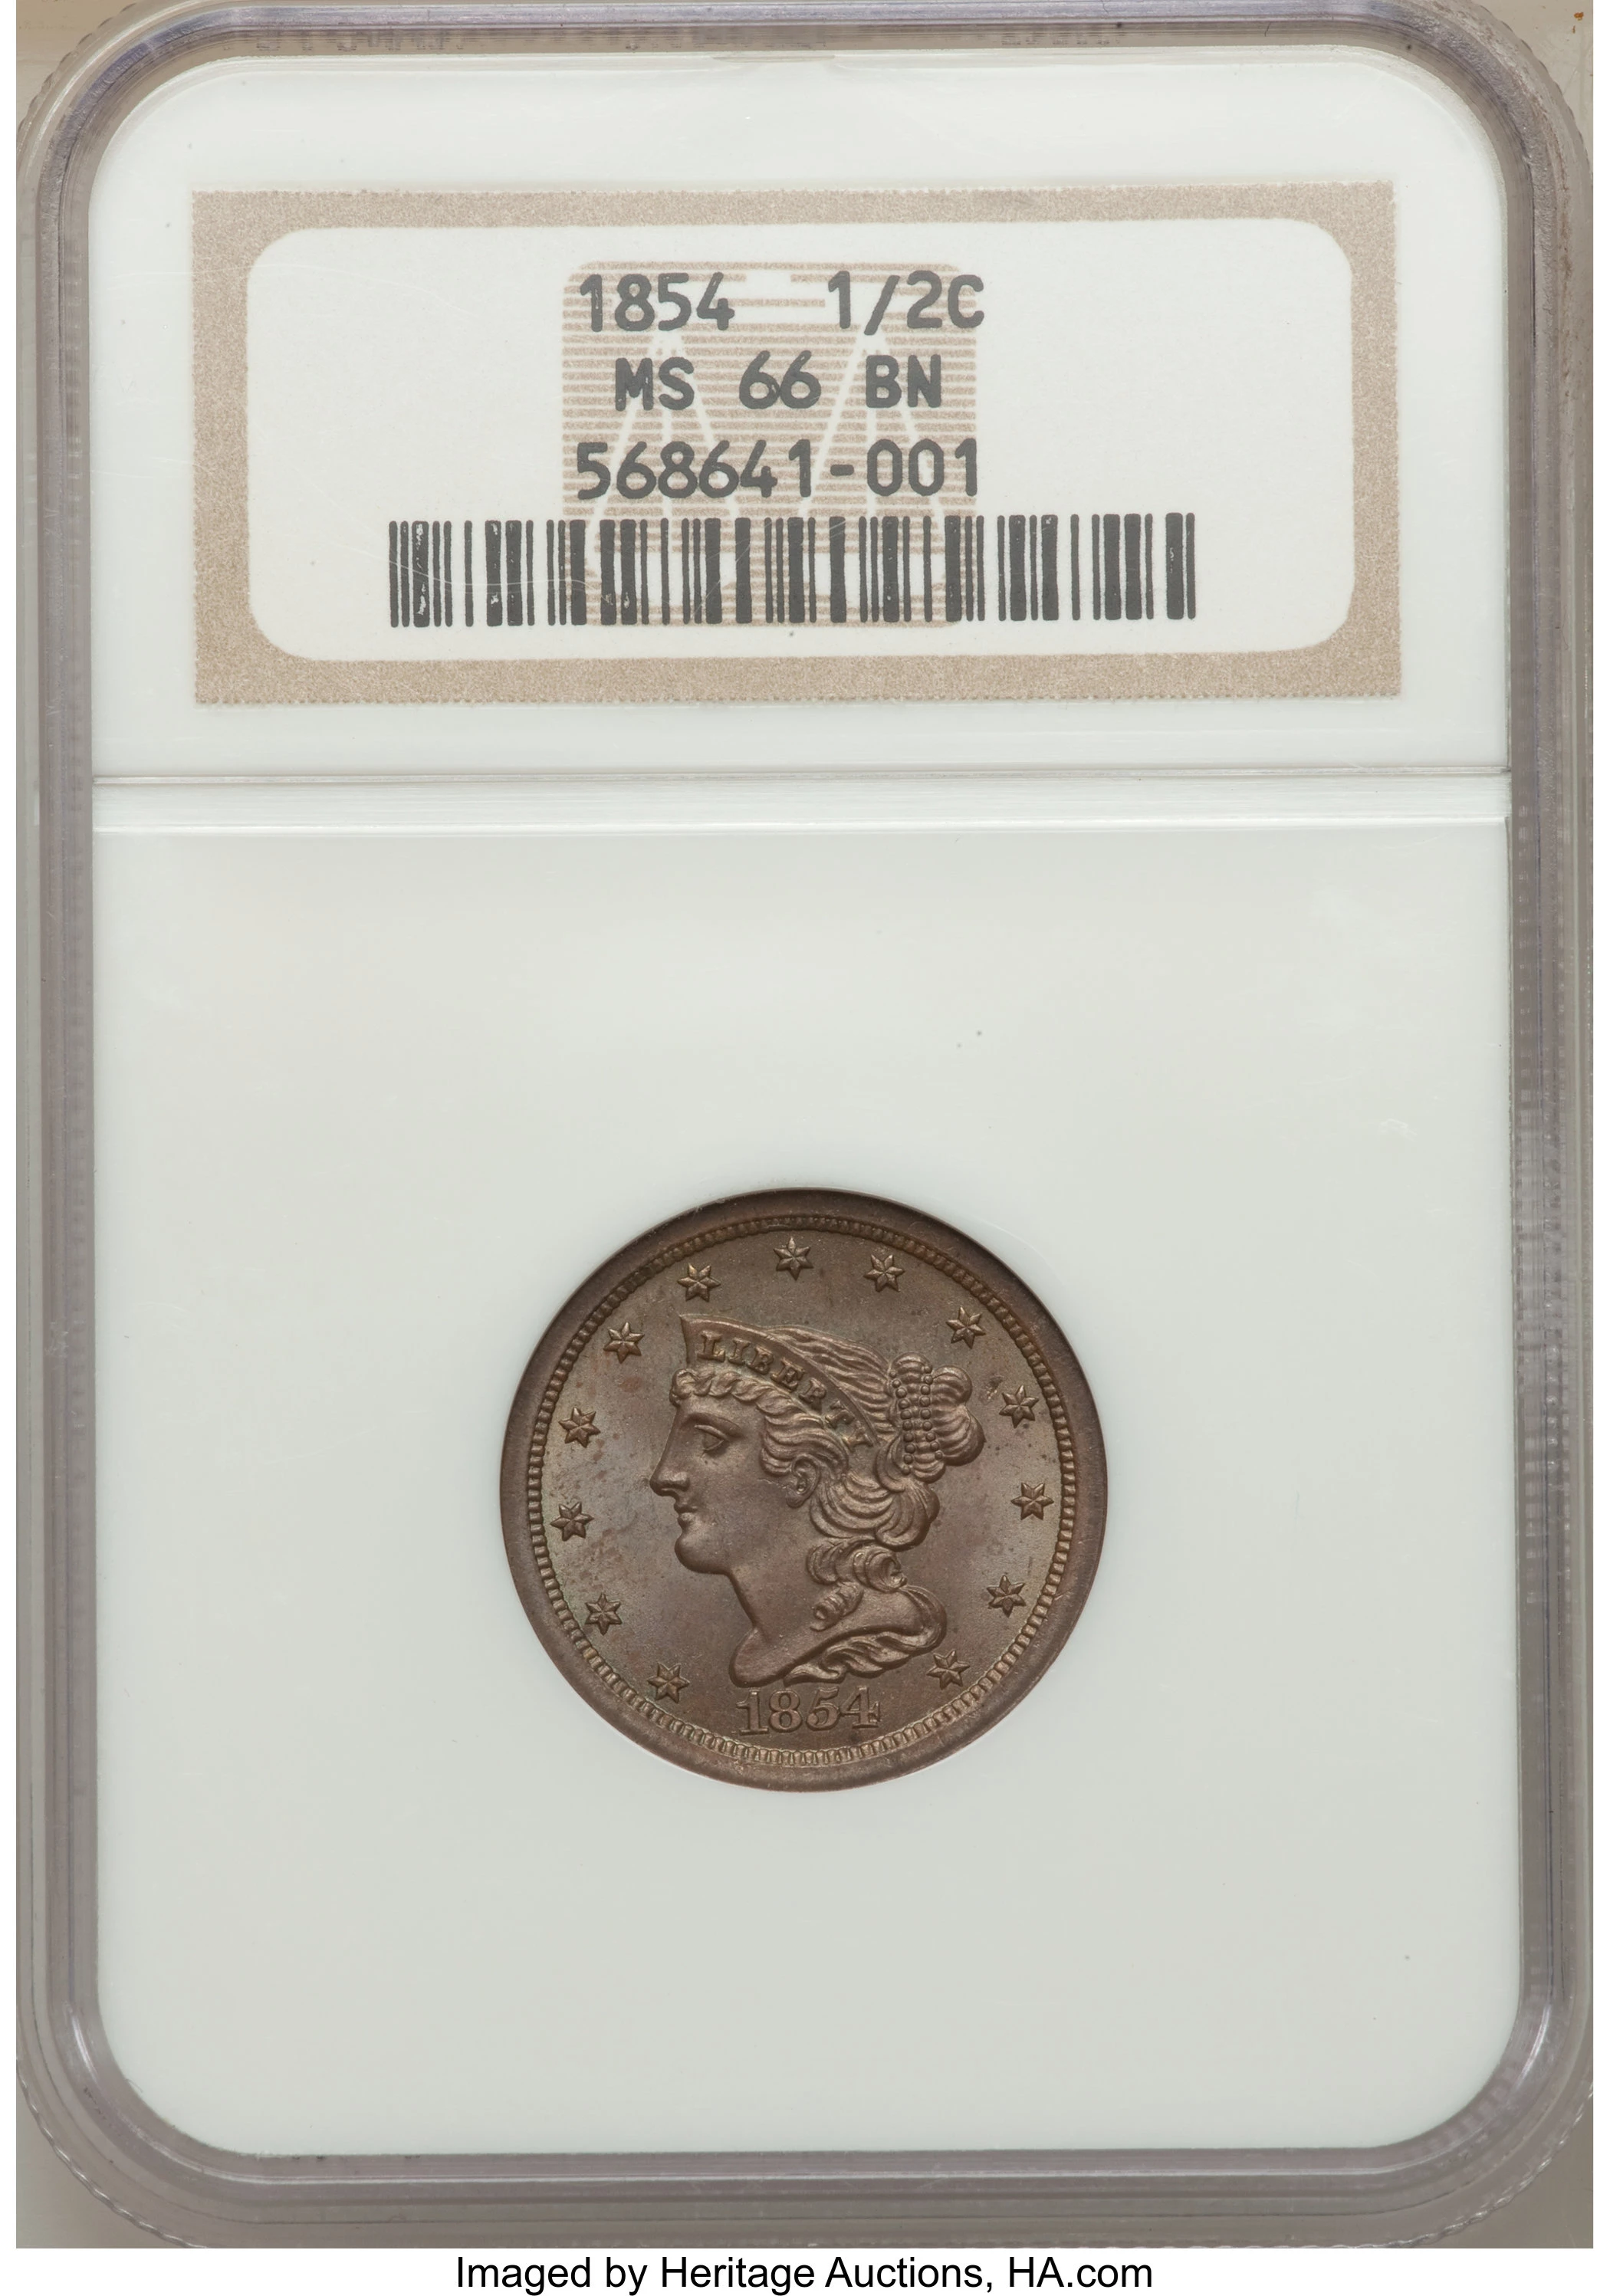 1854 1/2C, RD (Proof) Braided Hair Half Cent - PCGS CoinFacts